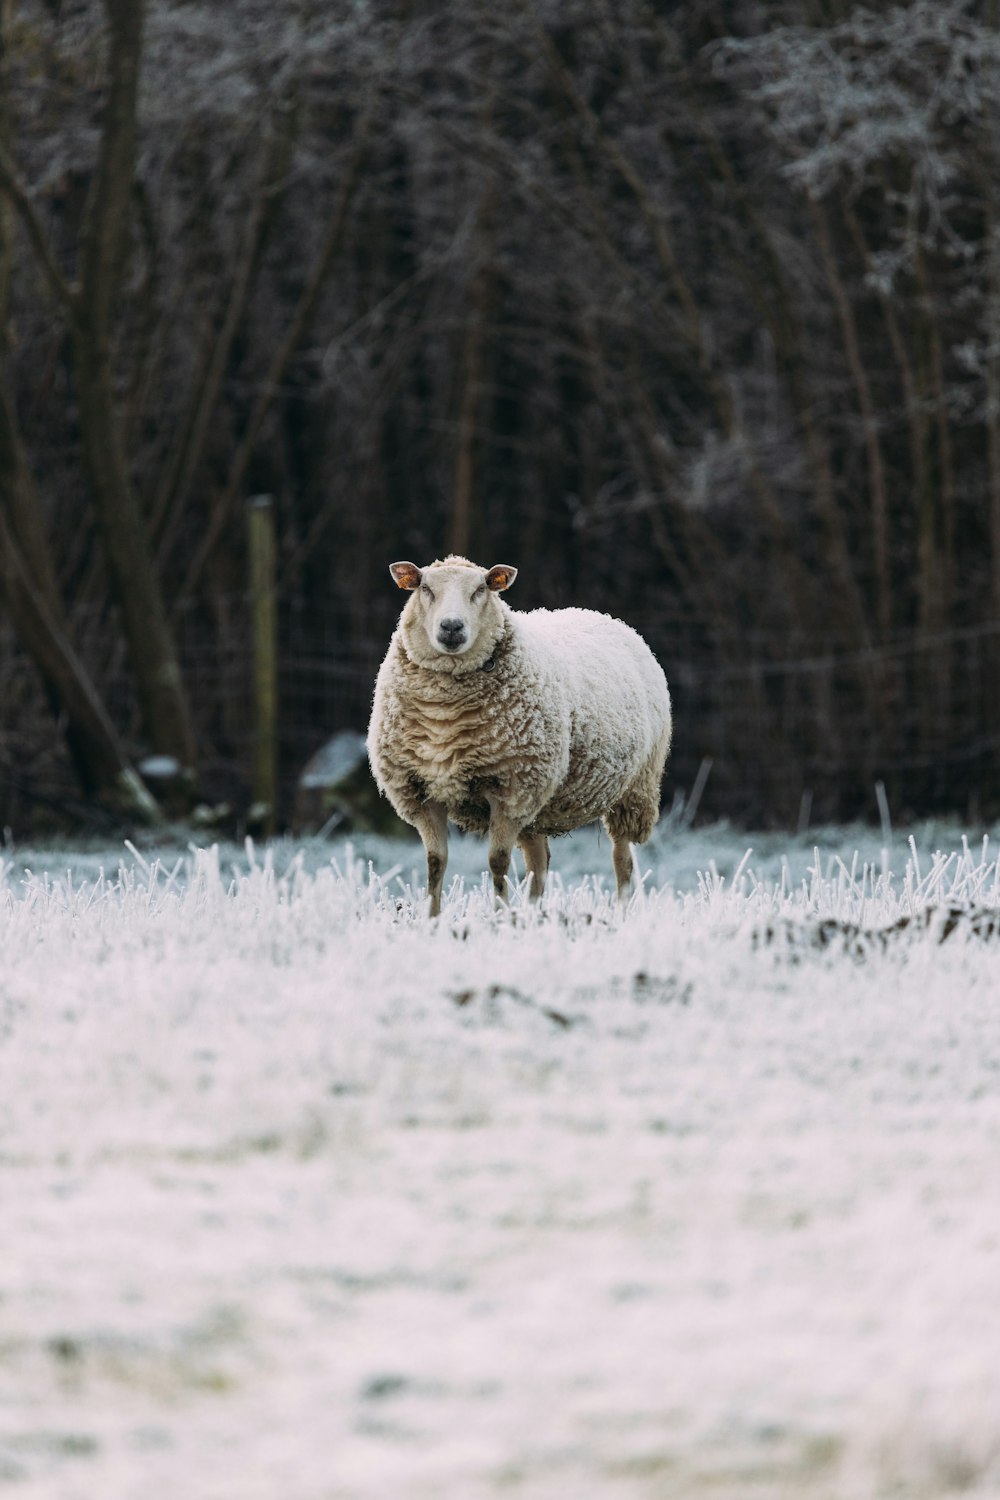 a sheep standing in a snowy field with trees in the background